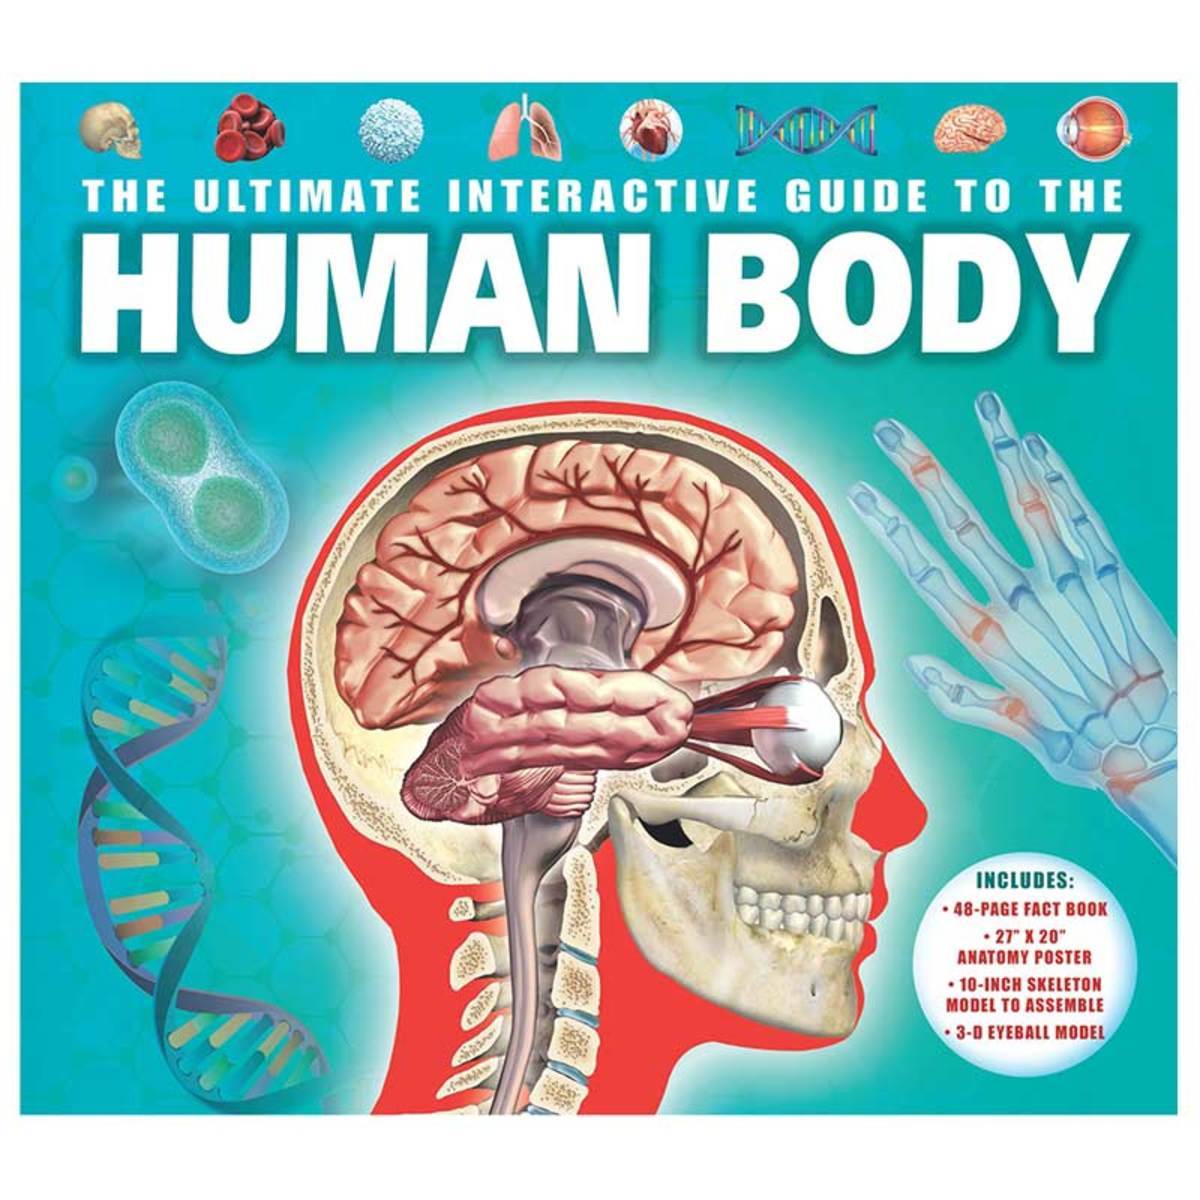 The Ultimate Interactive Guide to the Human Body